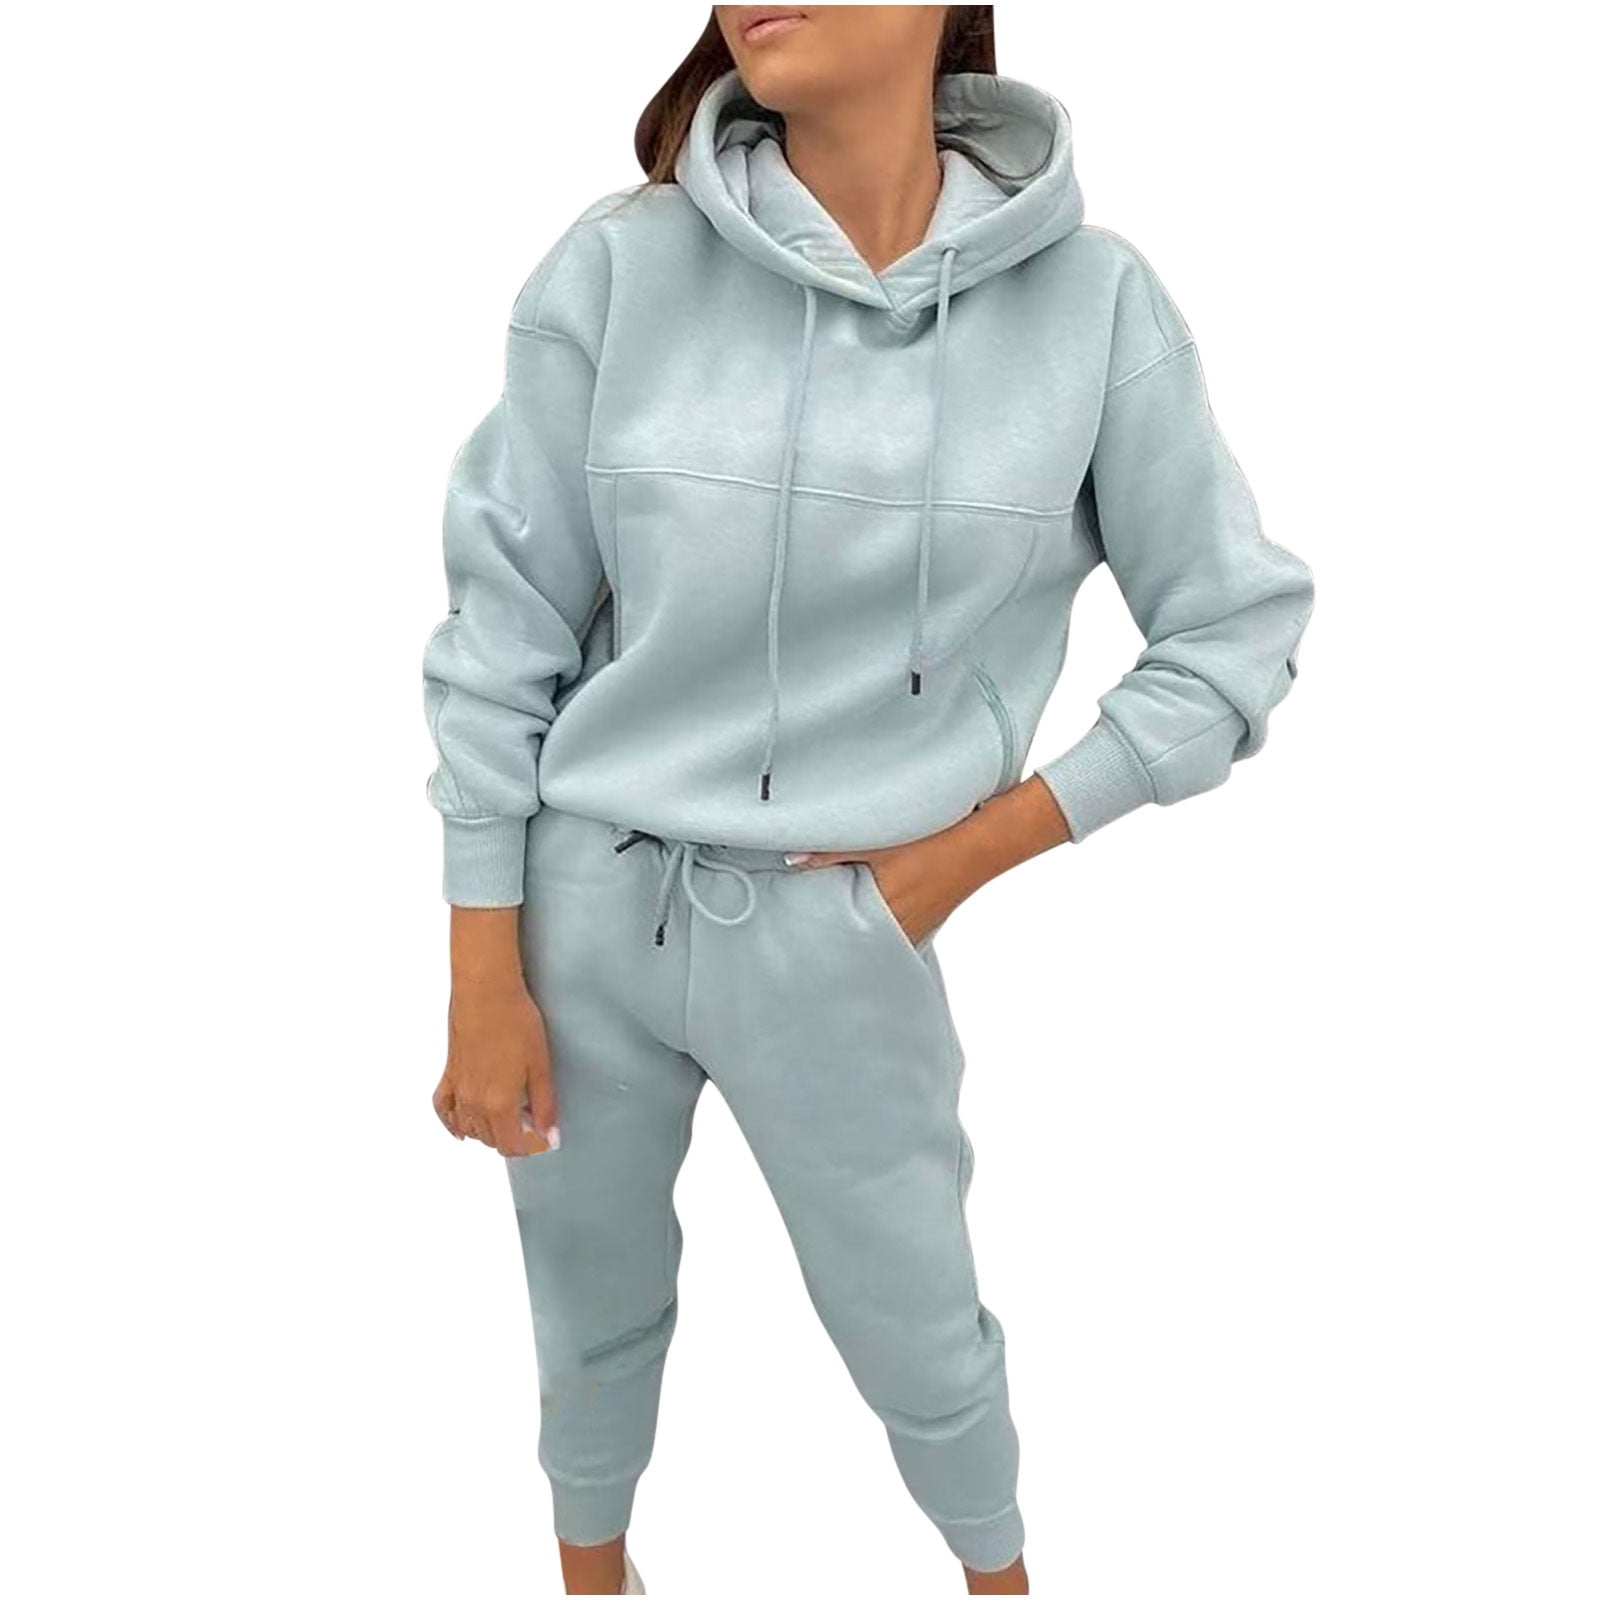 RQYYD Women's Jogging Suits Sets Hoodies Tracksuit Long Sleeve Drawstring  Sweatshirts and Sweatpant 2 Piece Color Block Sport Pullover Sweatsuit  Green